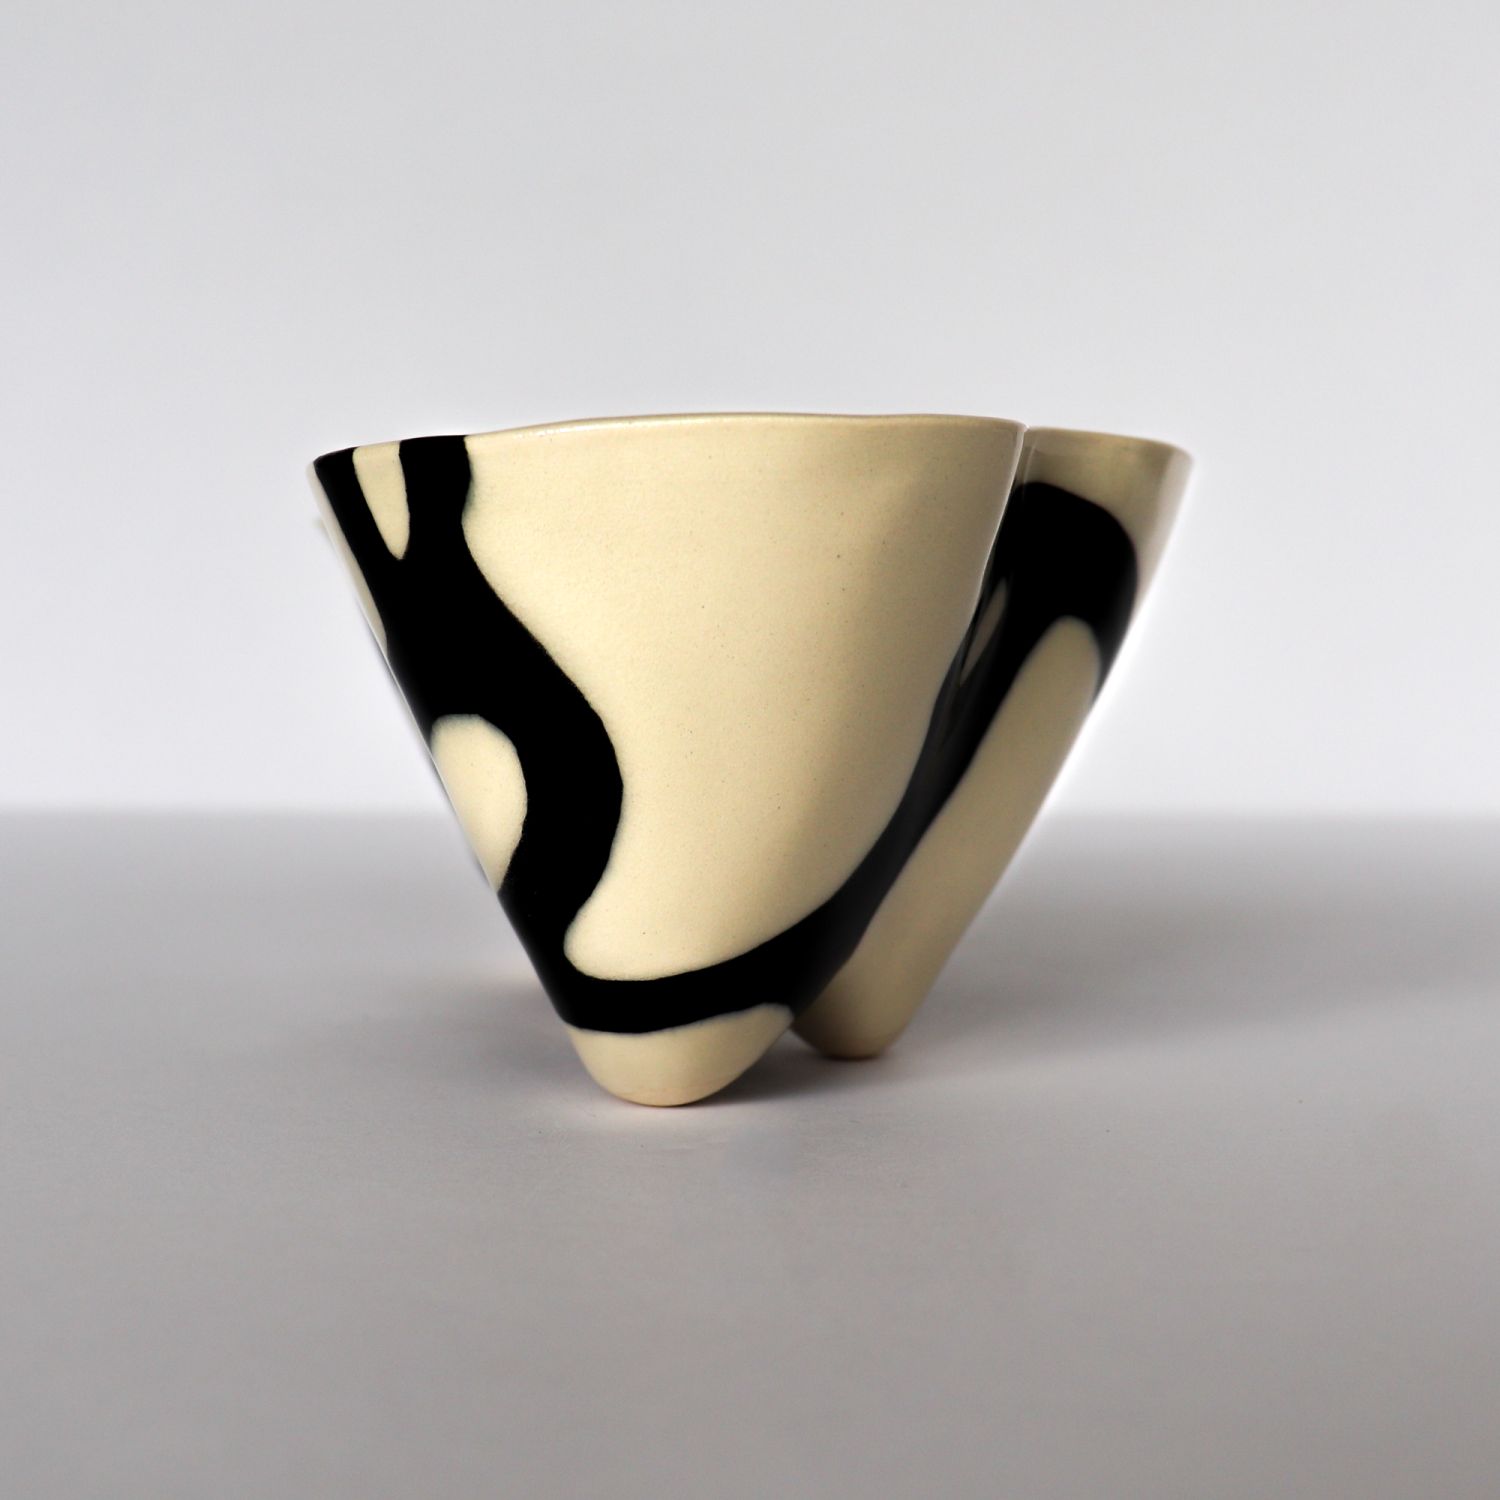 Alana Marcoccia: Interconnected Sculptural Bowl Product Image 10 of 13